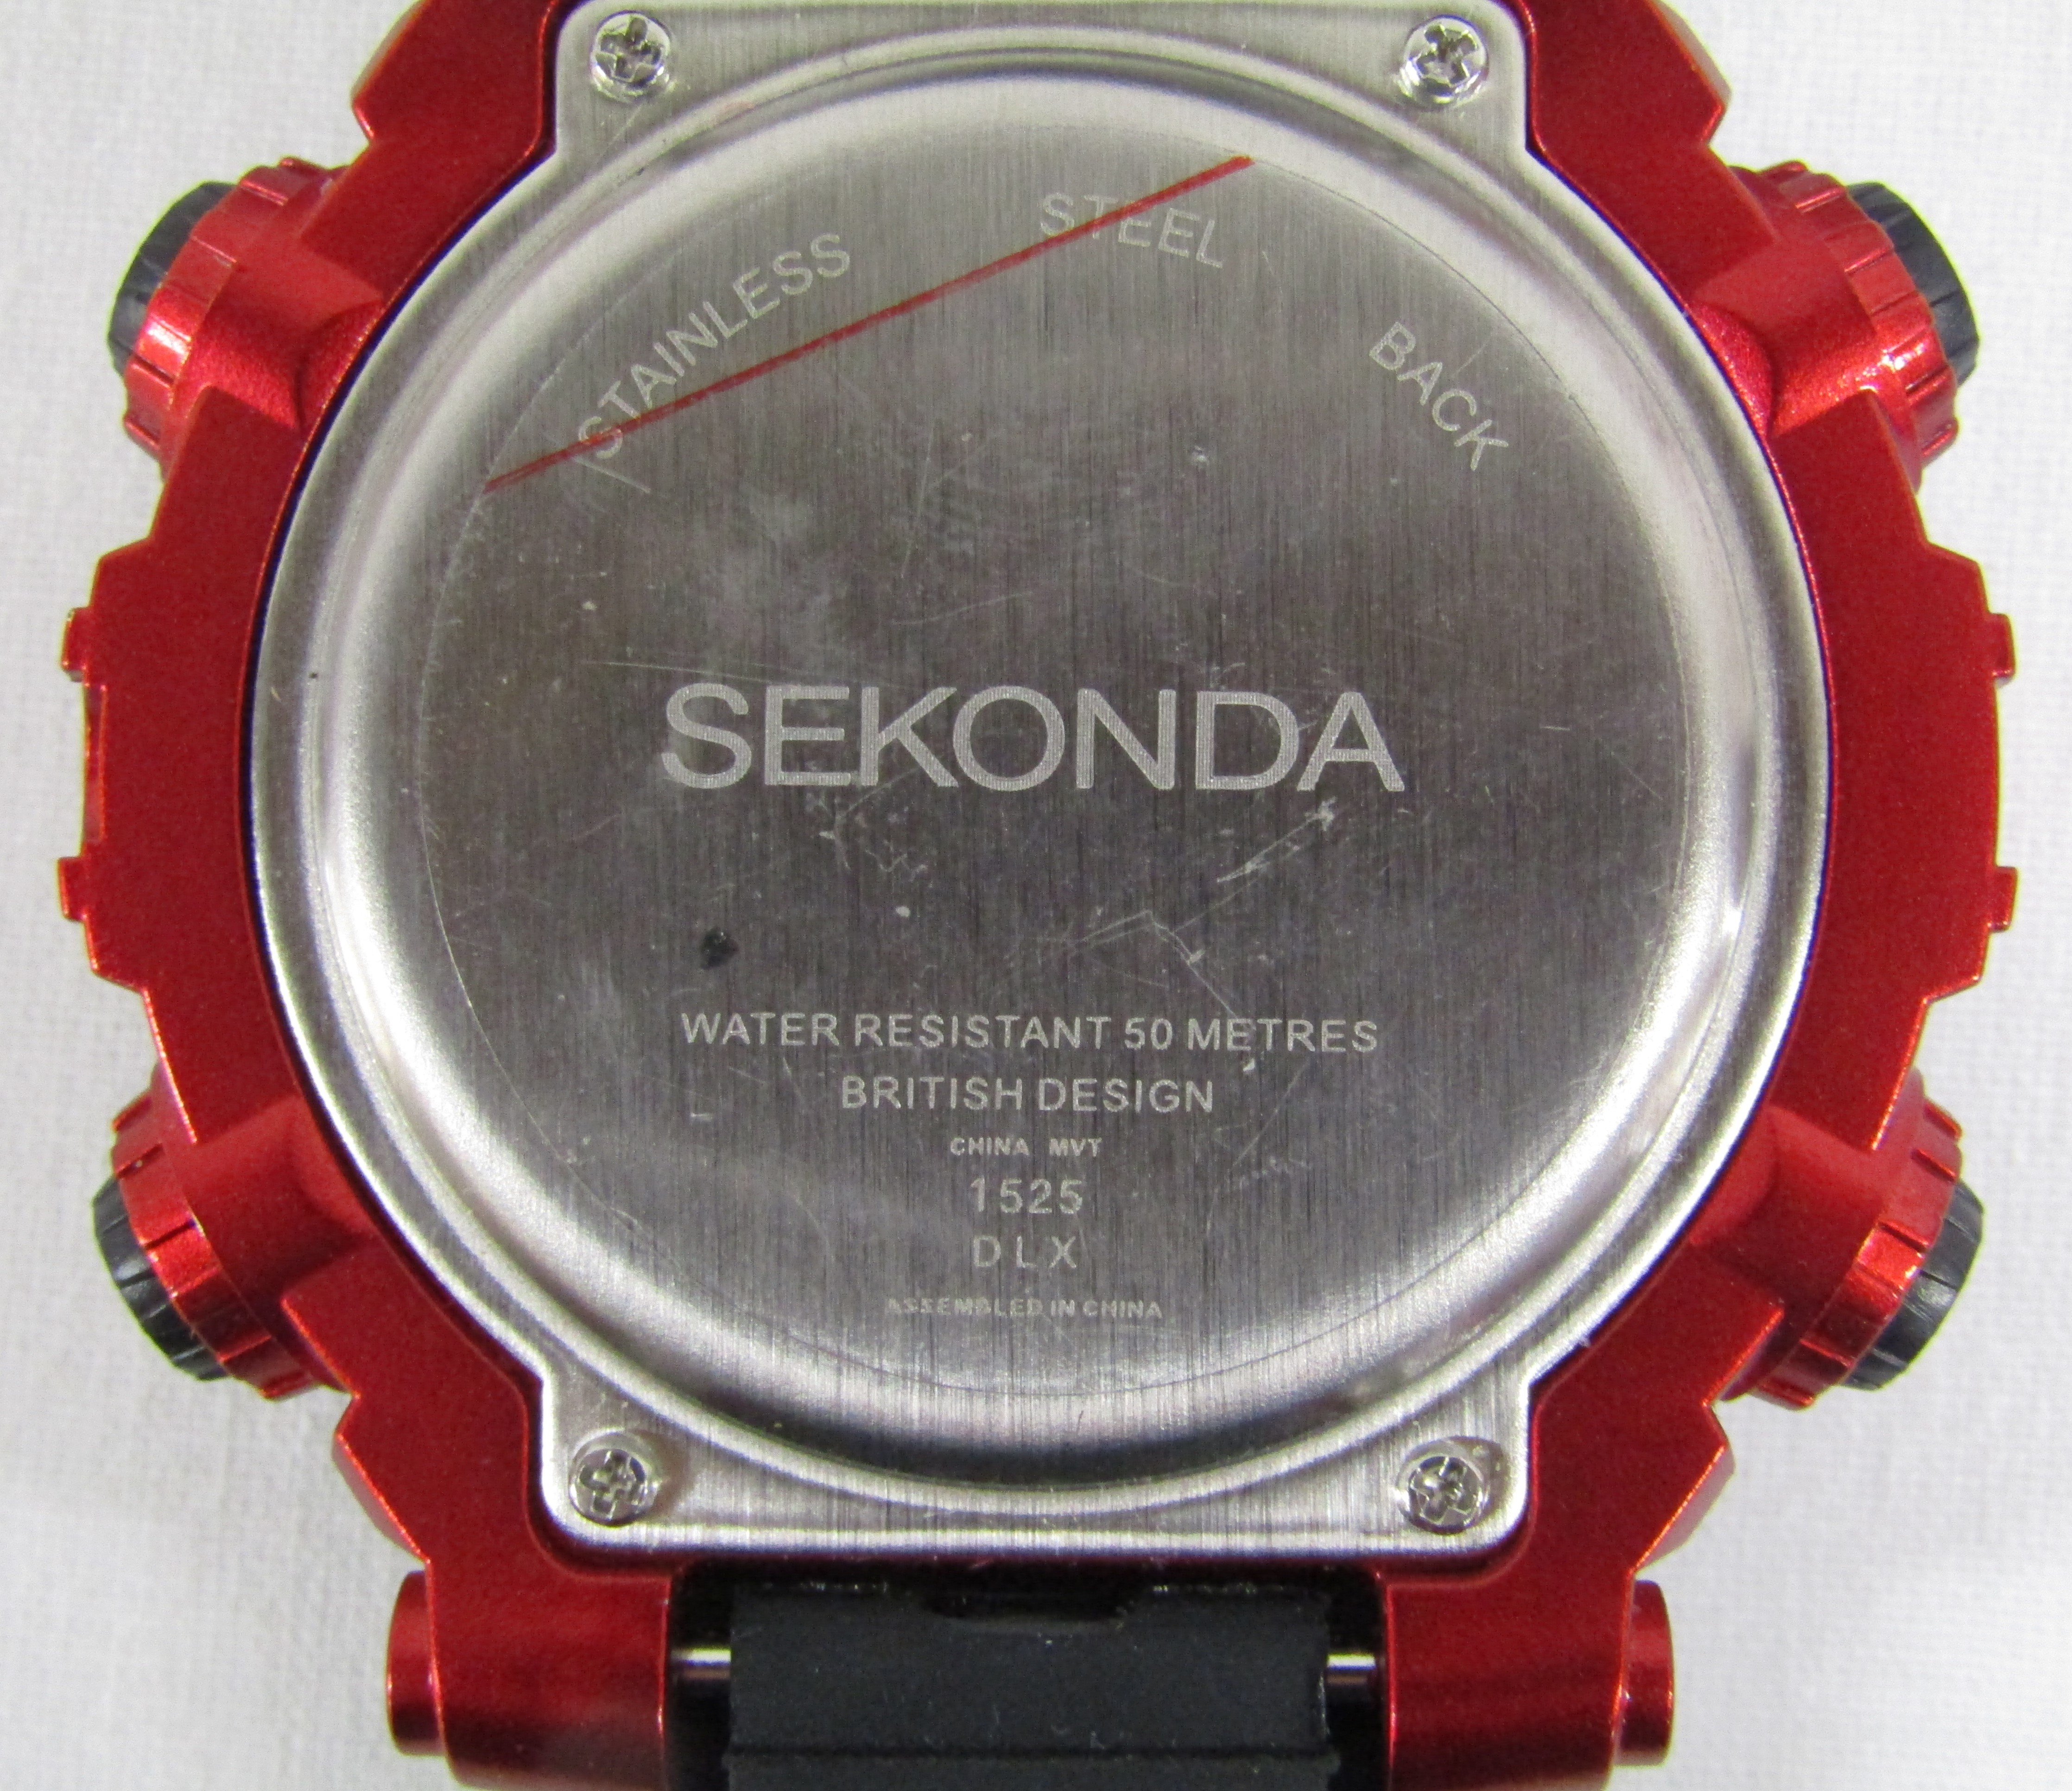 6 men's Sekonda watches - 1525 digital, 03405 with date, 3846 with date, 3407H chronograph, N3490 - Image 3 of 13